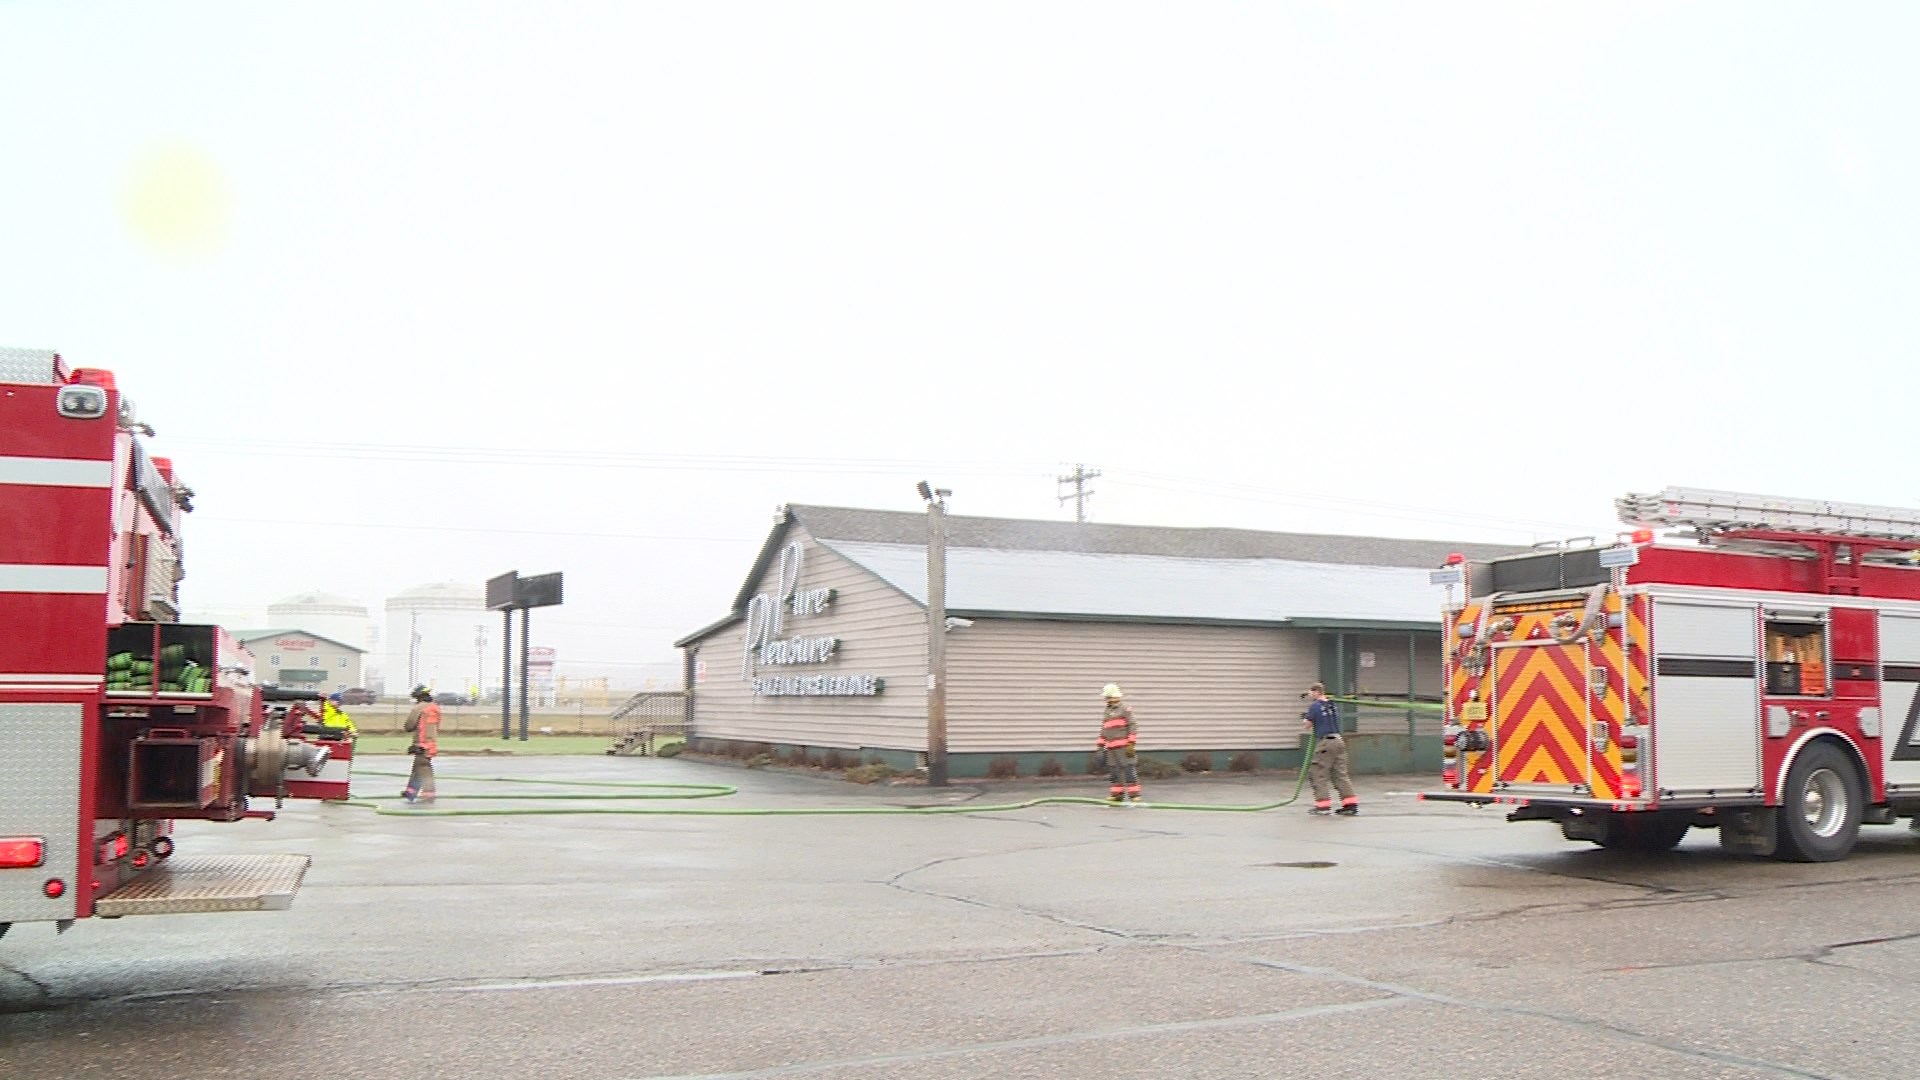 Fire at 'Pure Pleasures' in Lake Hallie appears to be electrical in nature